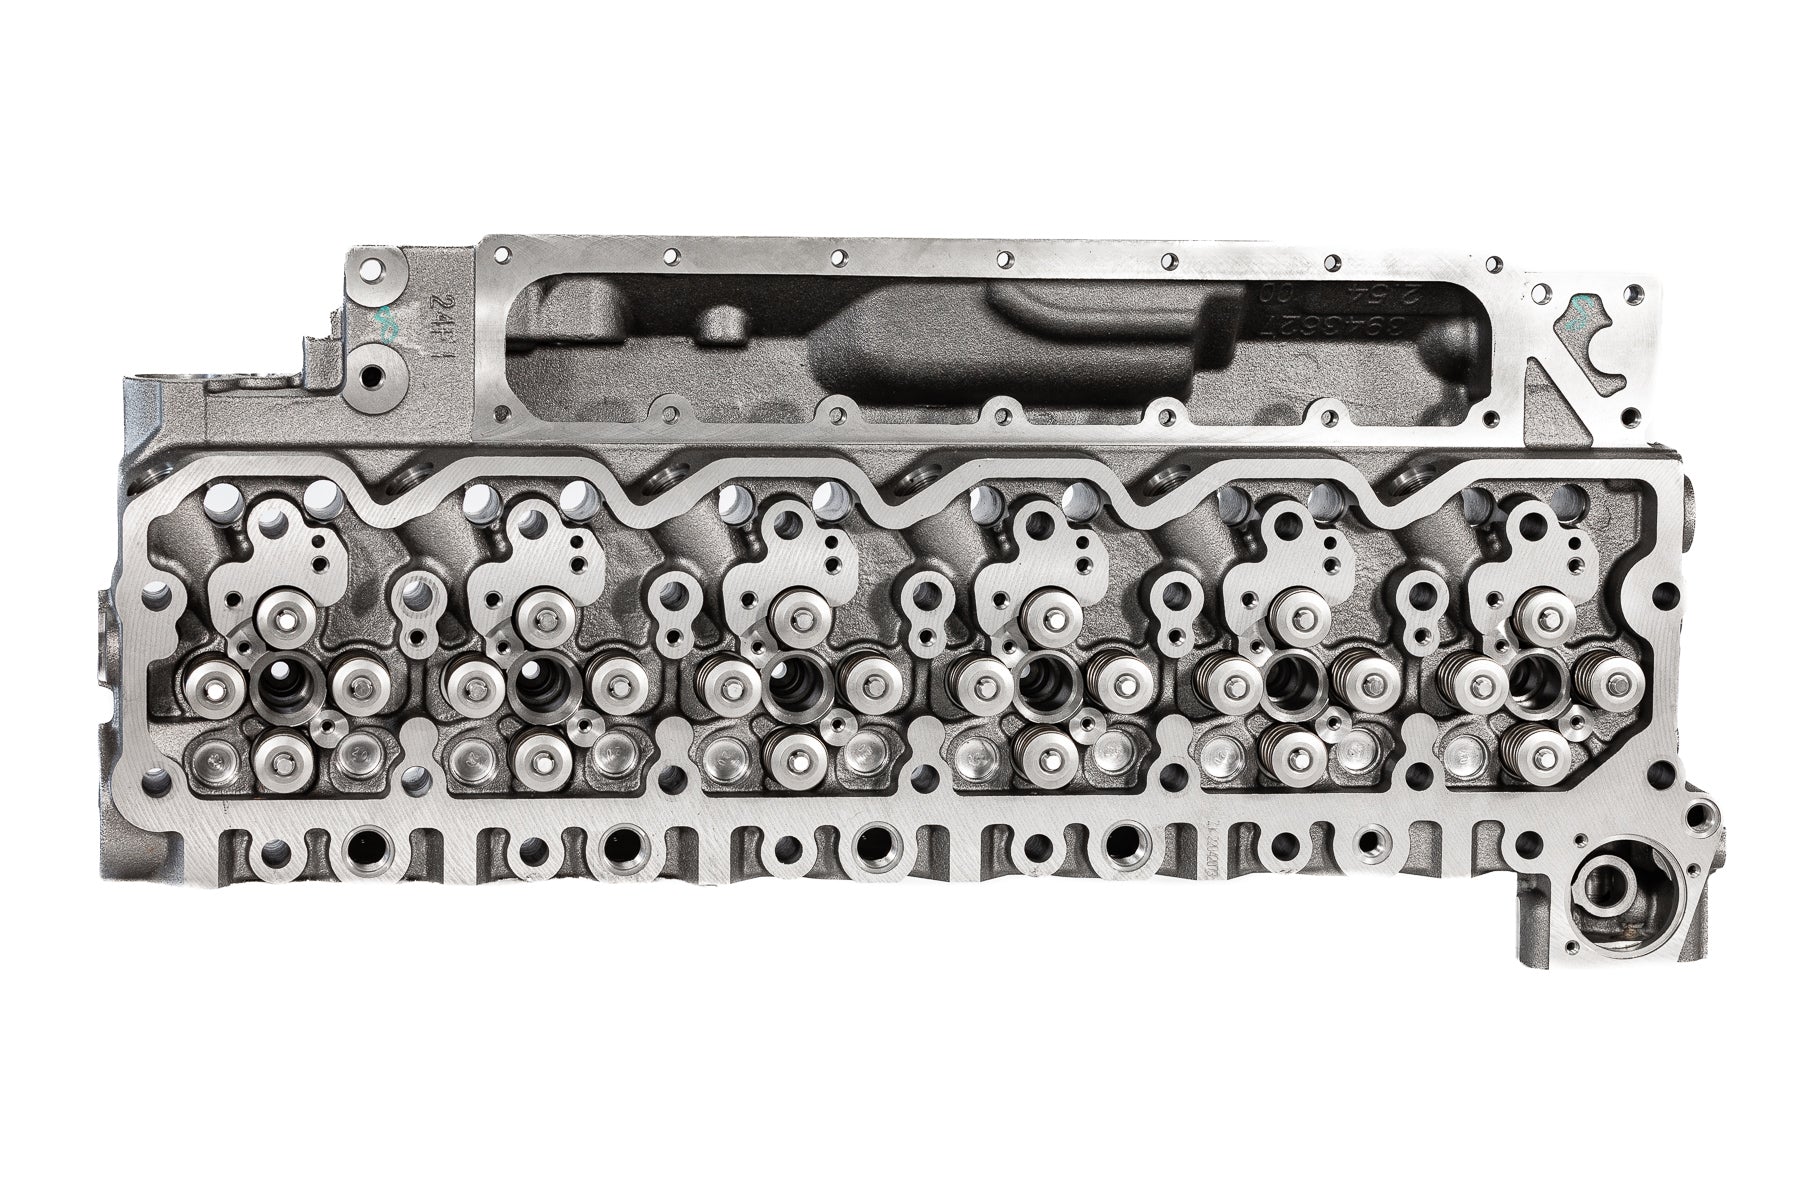 98.5-02-24-valve-head-loaded-oem-with-fire-ring